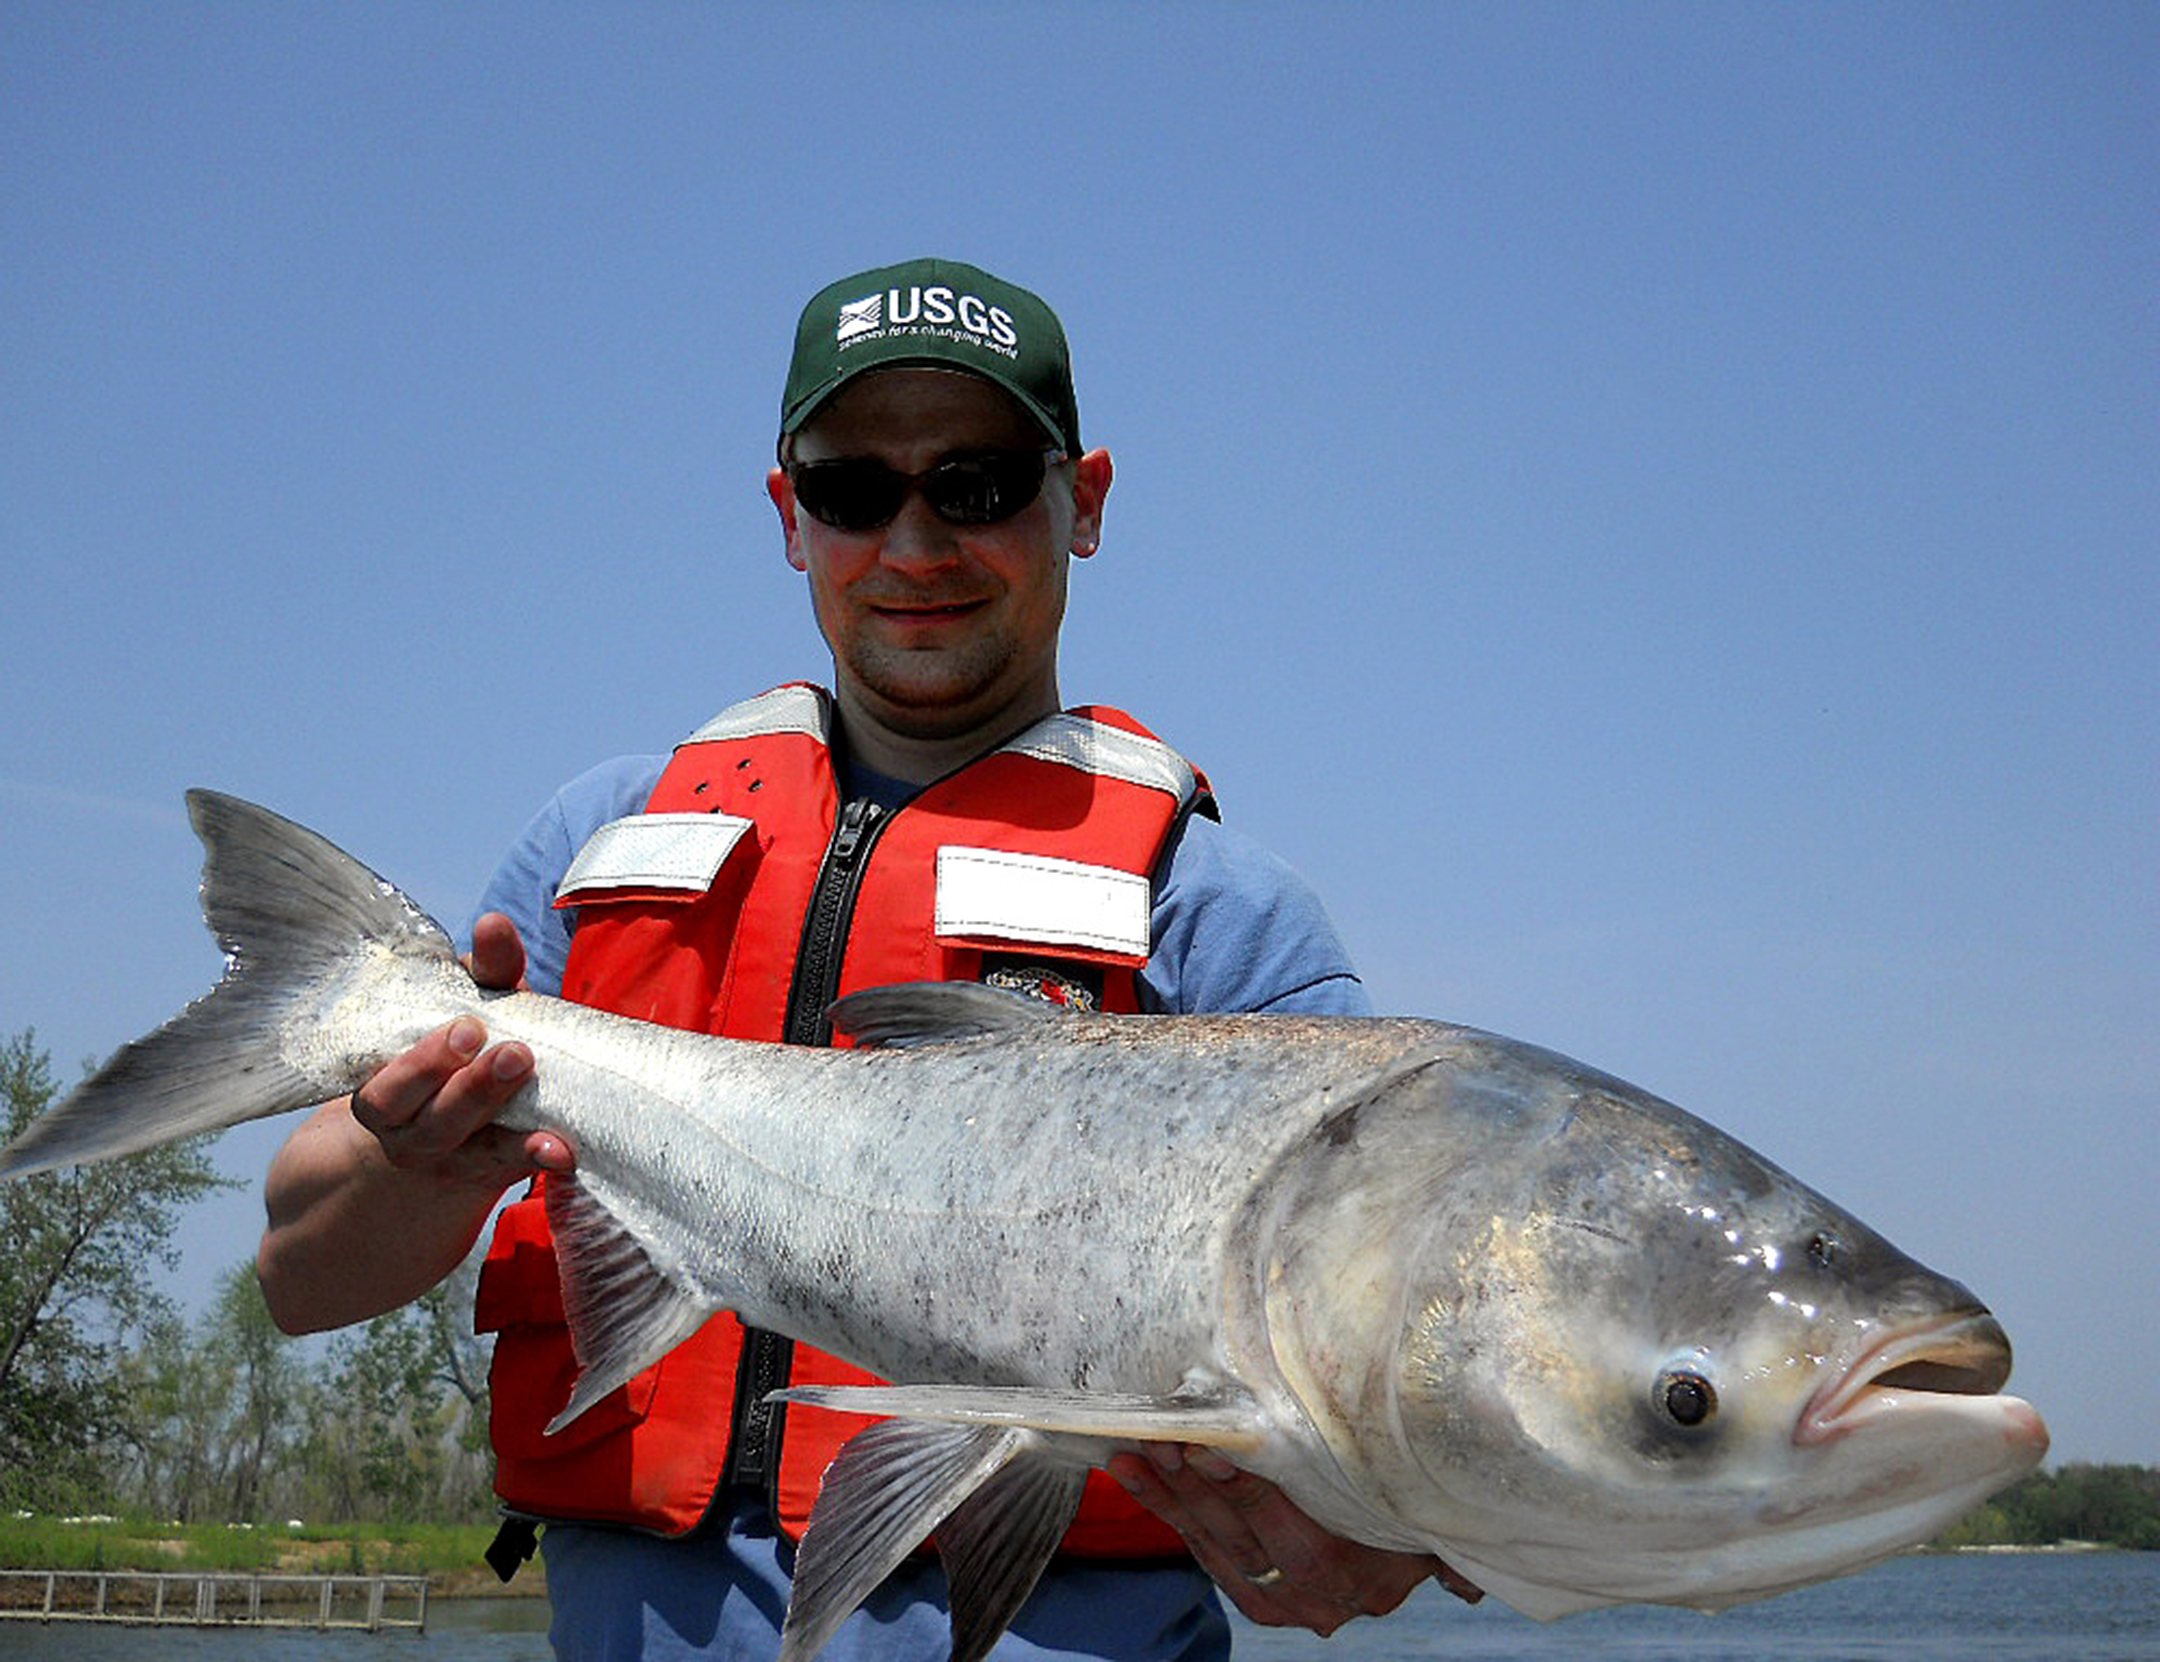 Man in sunglasses and a life vest smiles while holding a large fish